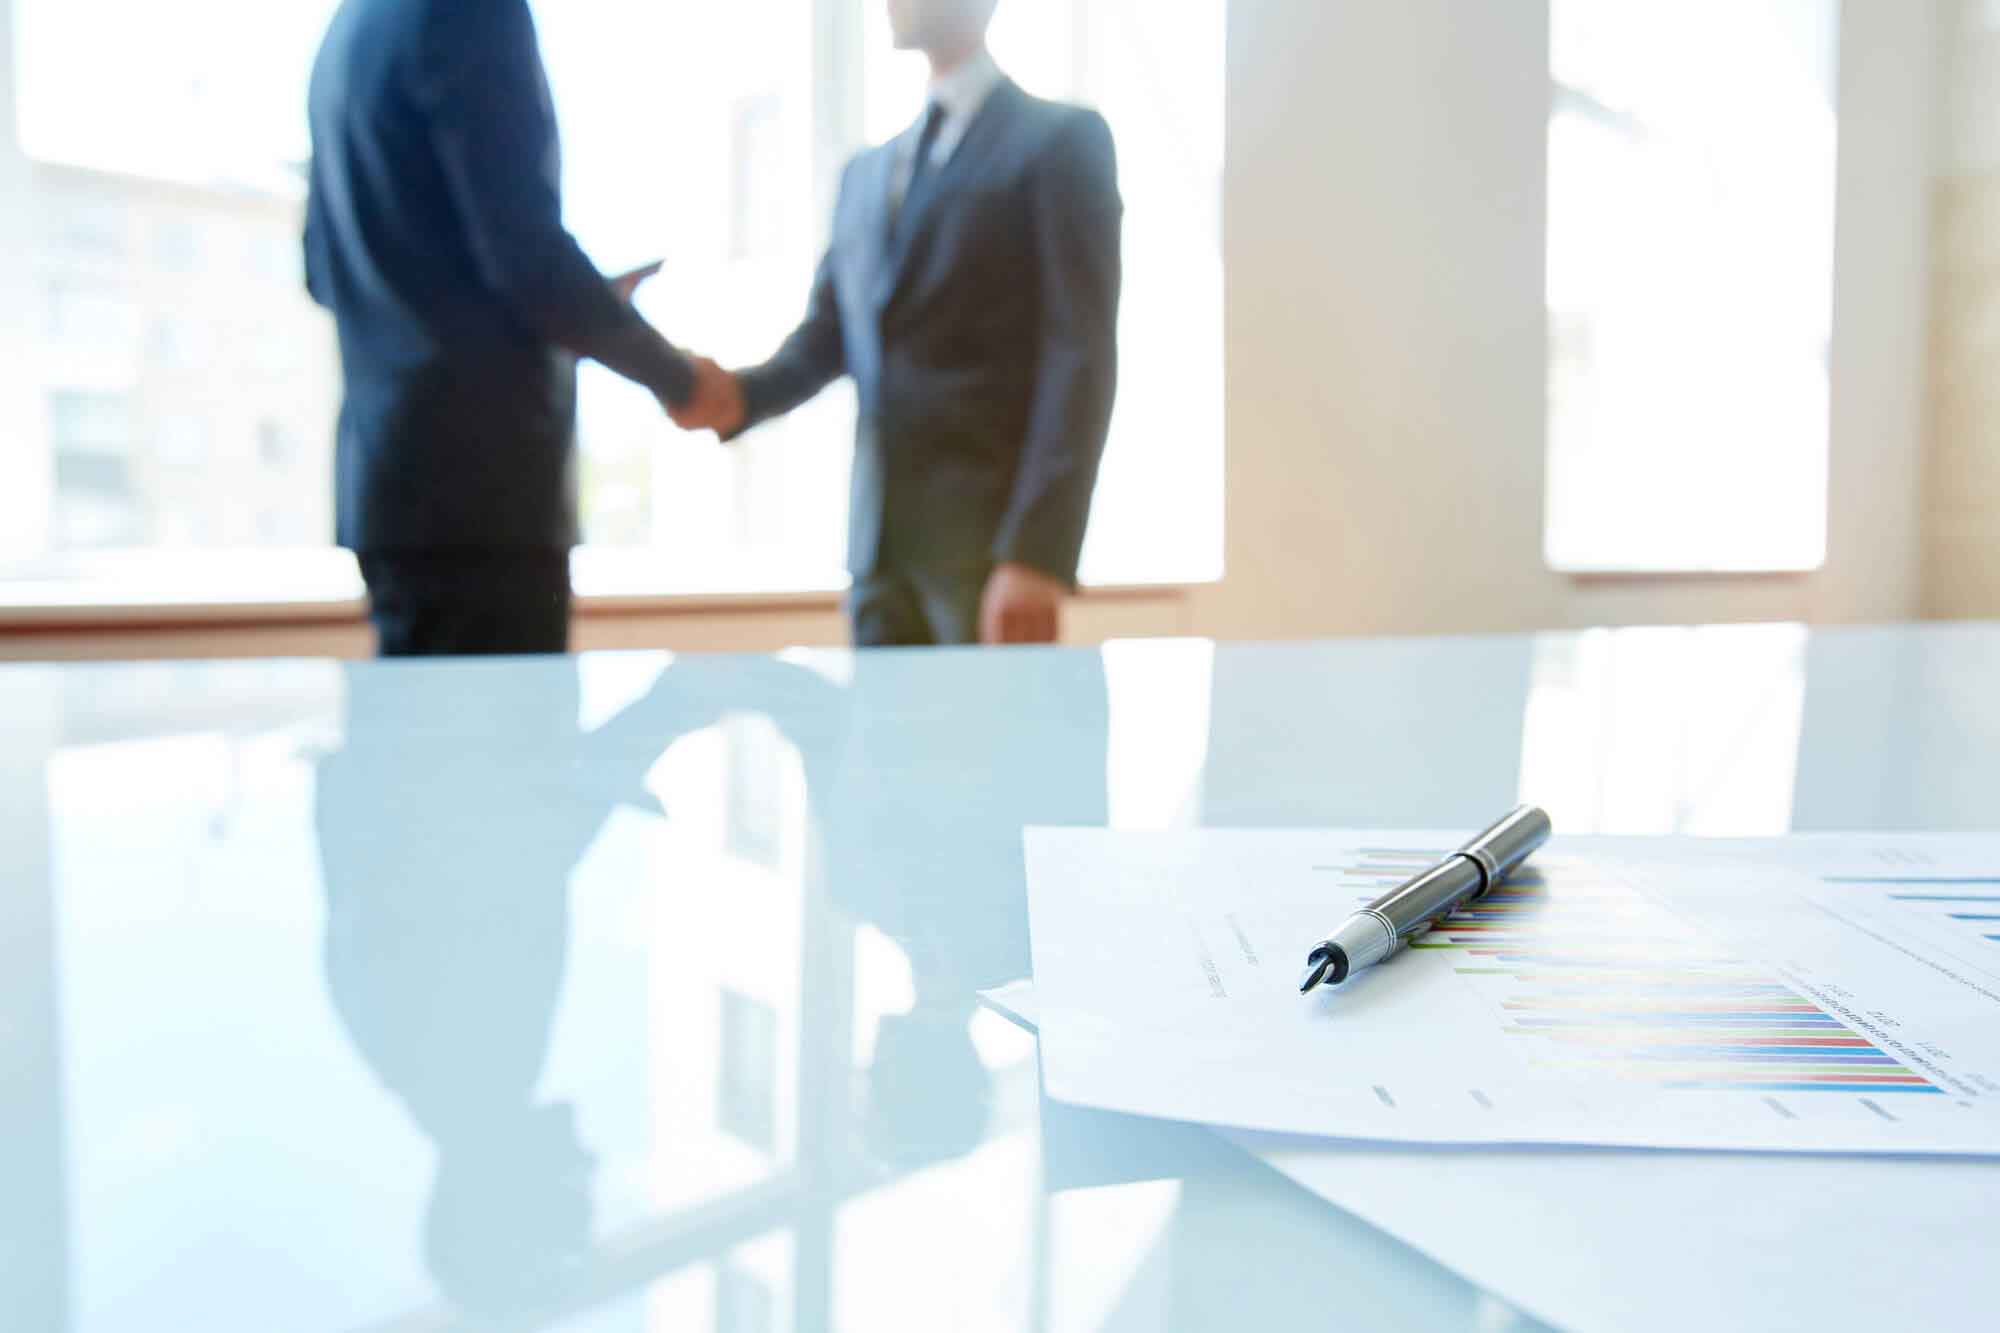 image of documents and pen on the table with 2 professionals shaking hands in background